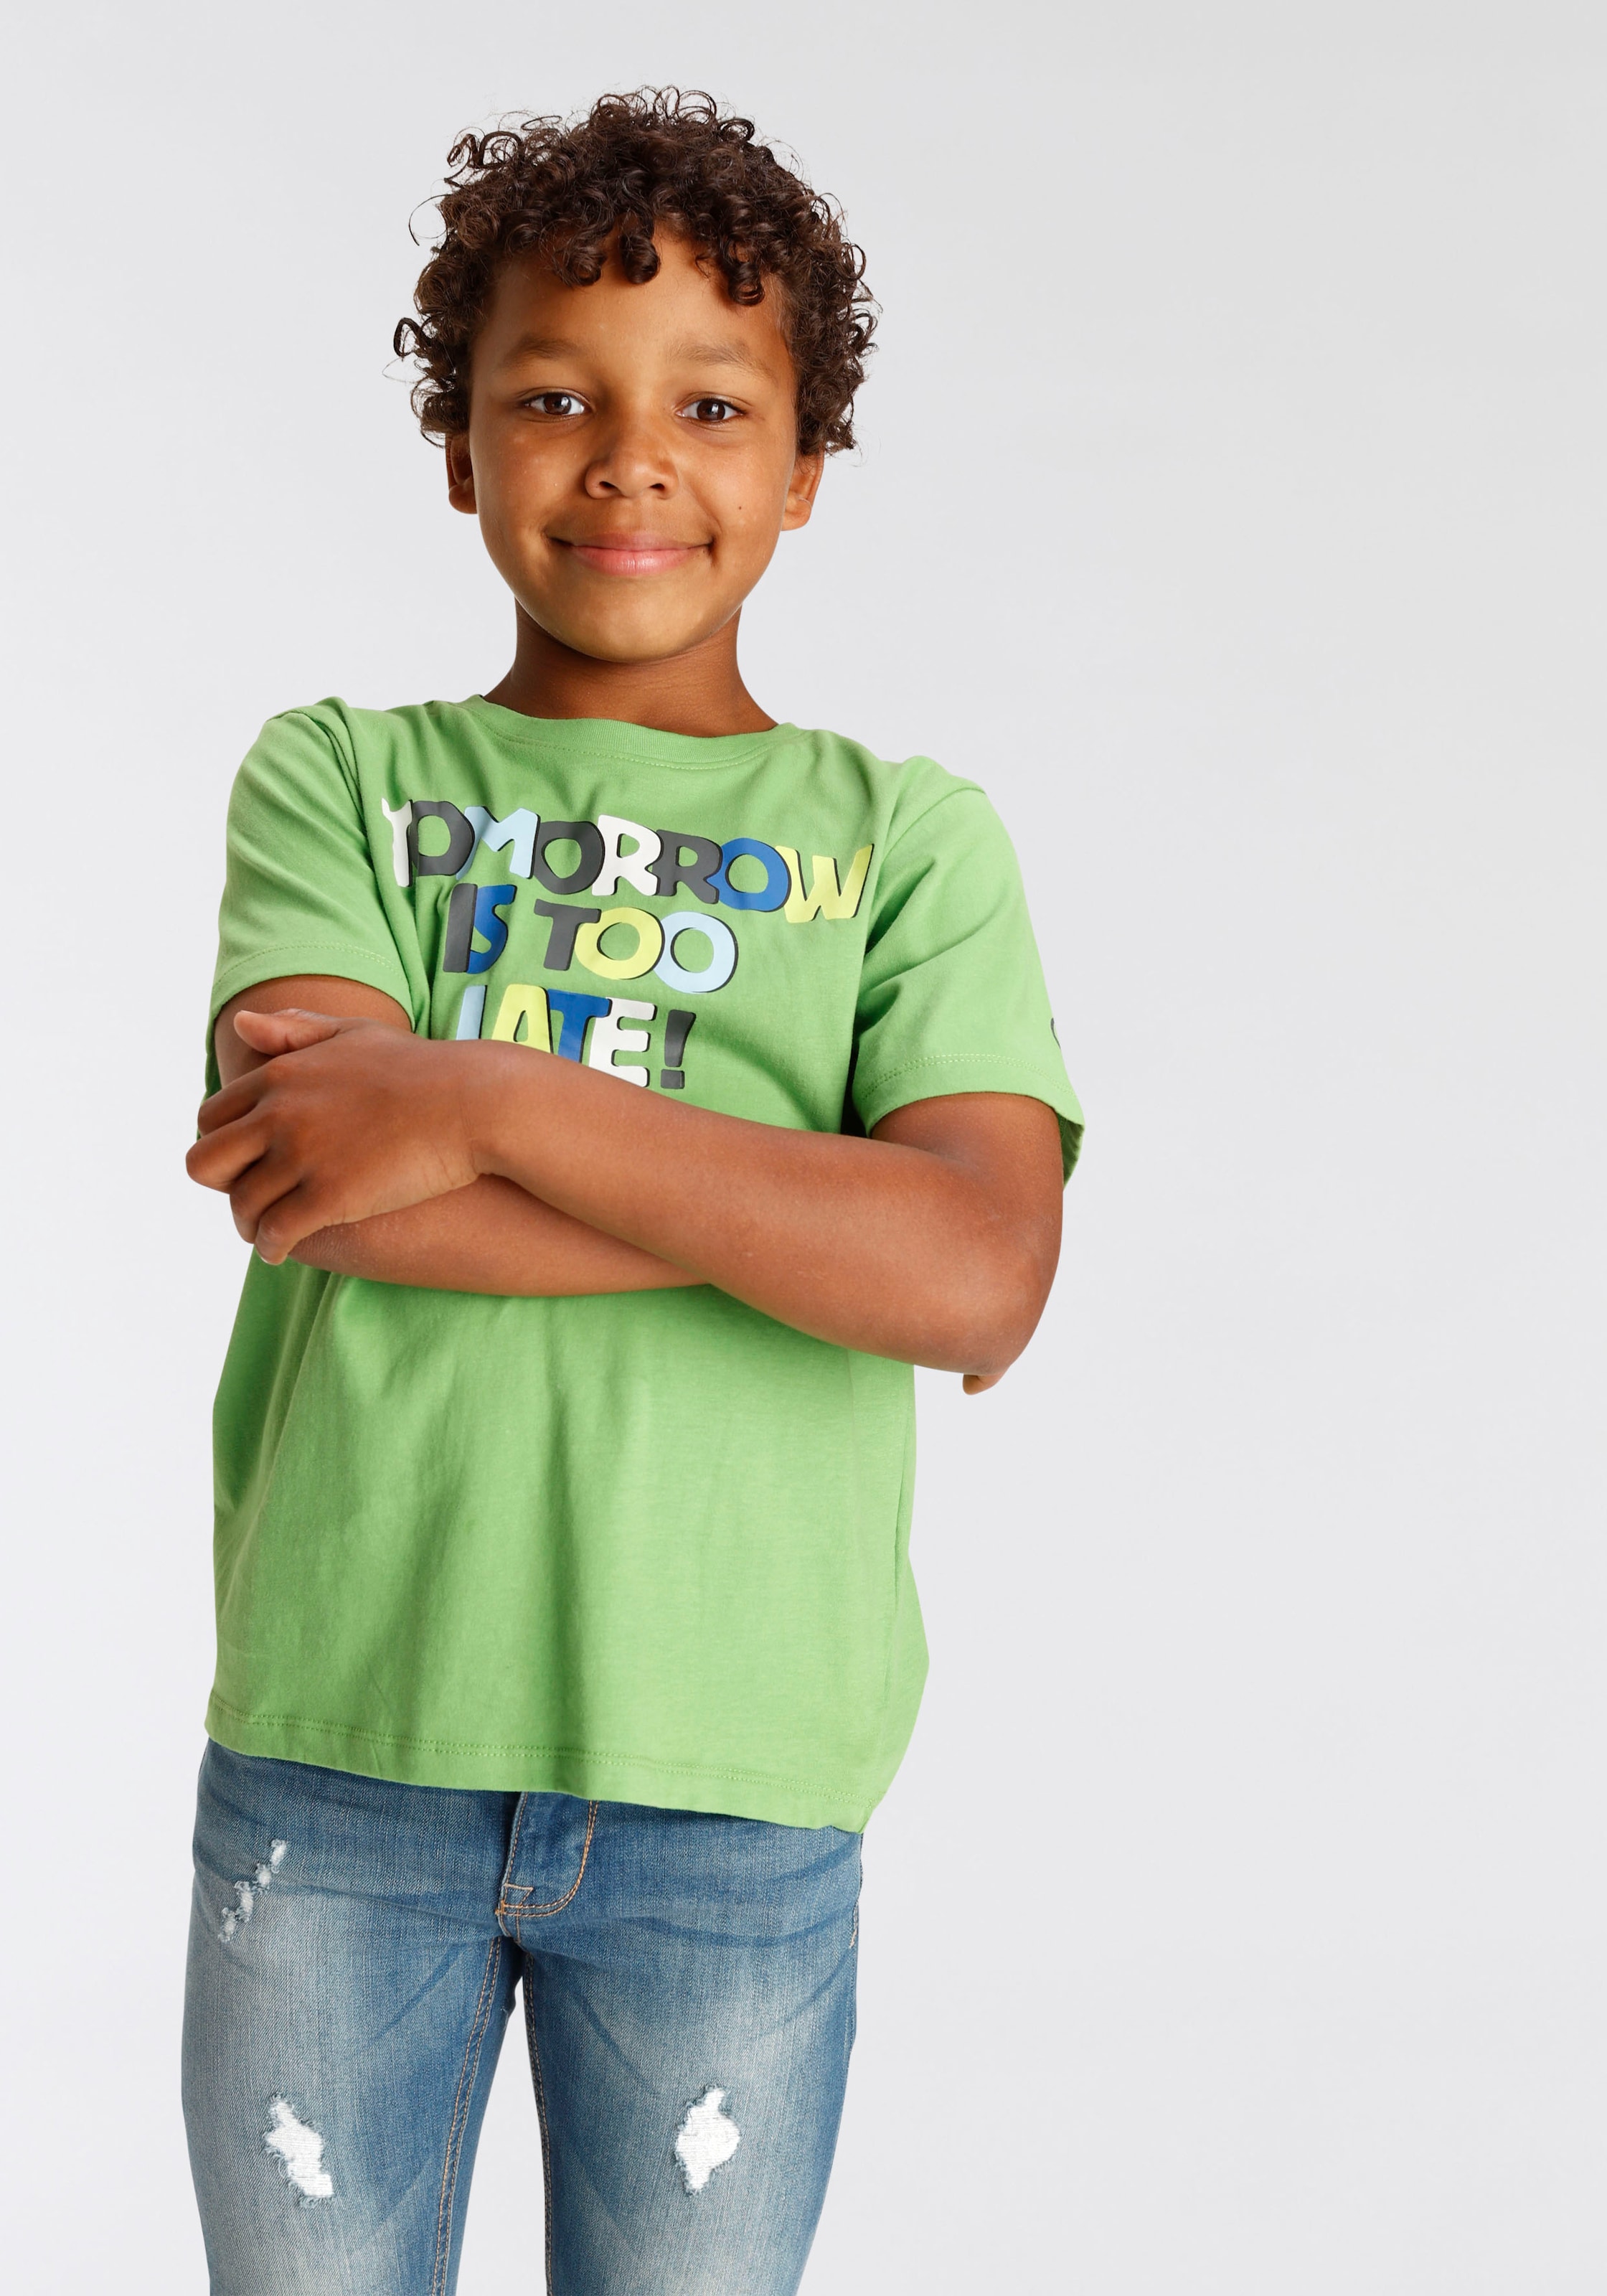 KIDSWORLD T-Shirt »TOMORROW IS Spruch LATE«, TOO bei